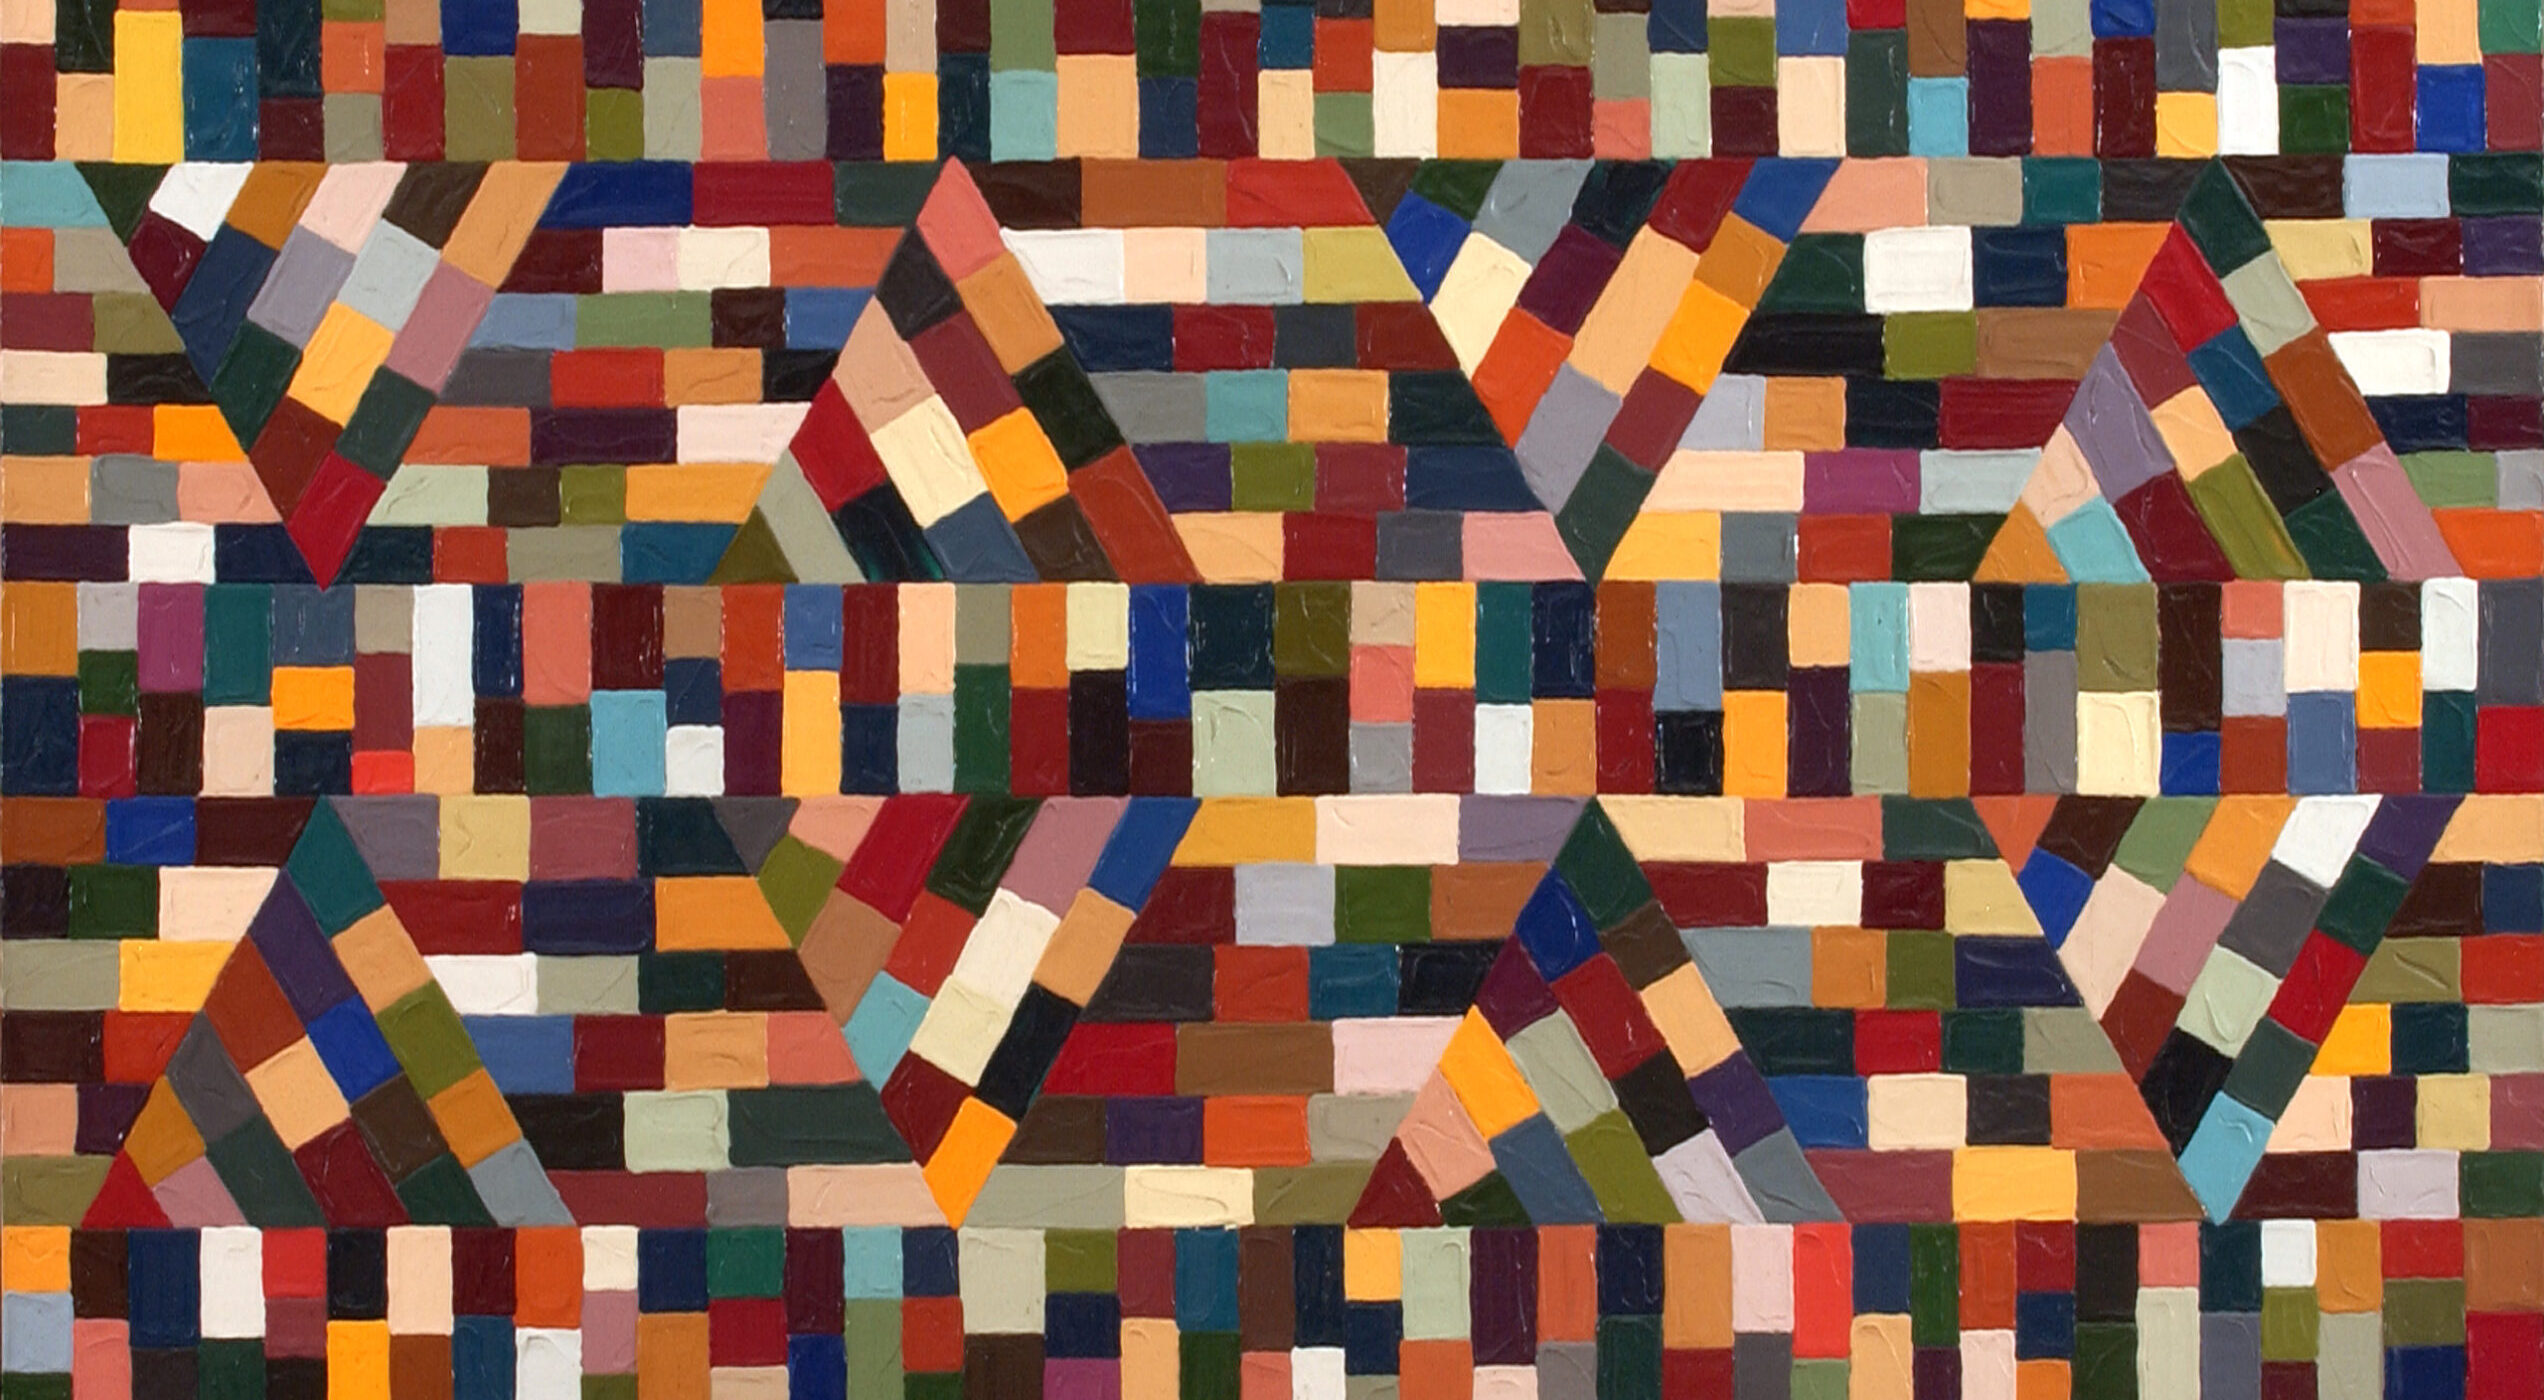 Geometric abstract painting composed of different colored squares arranged in a mosaic-like pattern.